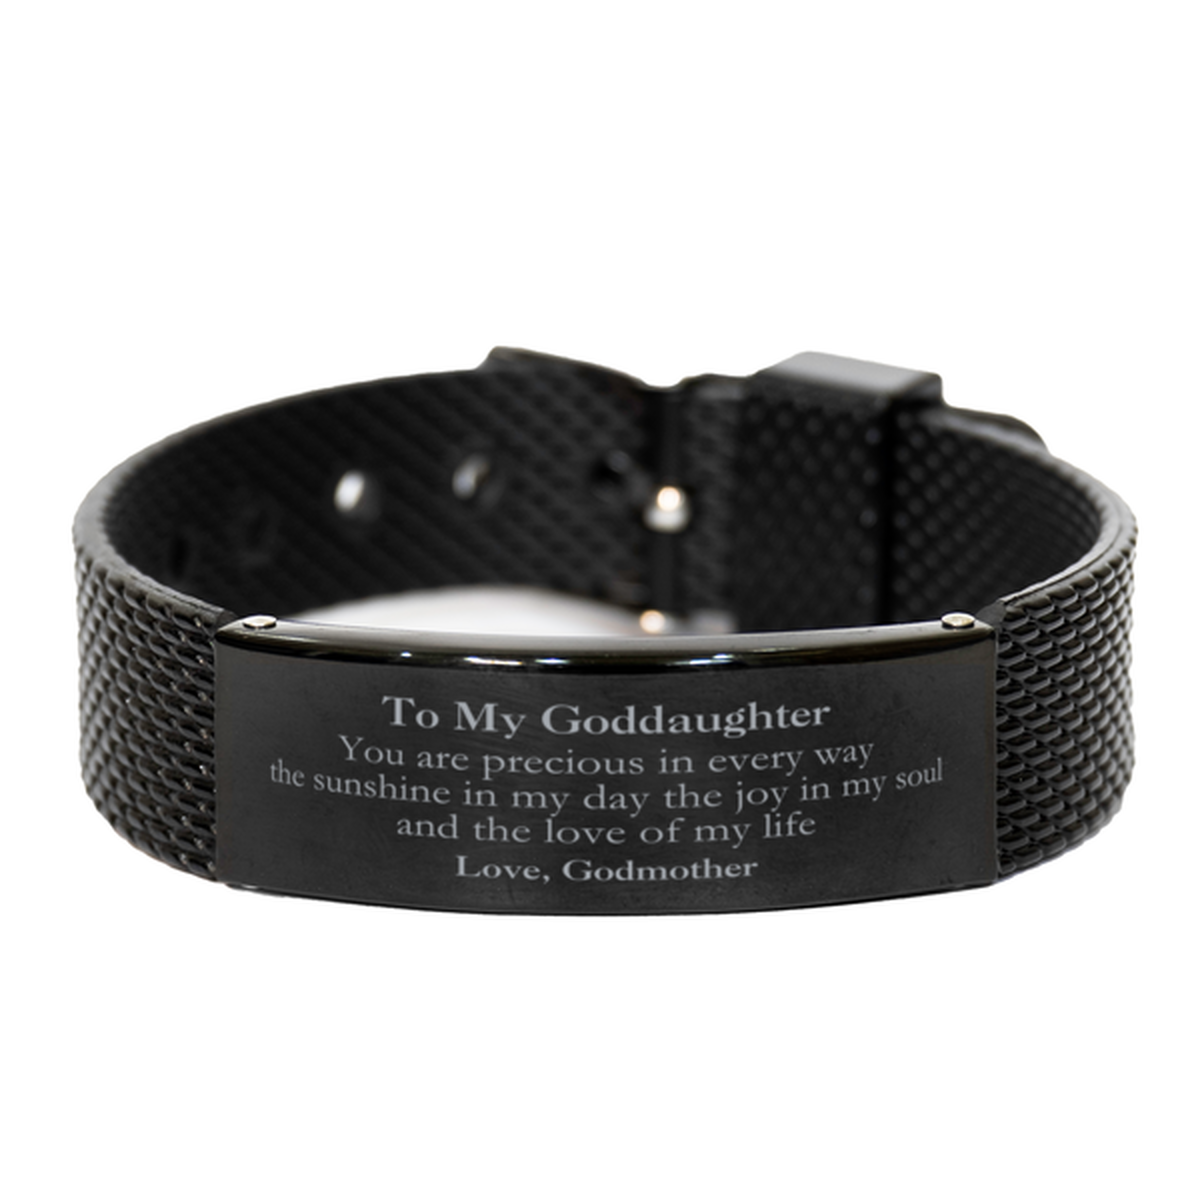 Graduation Gifts for Goddaughter Black Shark Mesh Bracelet Present from Godmother, Christmas Goddaughter Birthday Gifts Goddaughter You are precious in every way the sunshine in my day. Love, Godmother